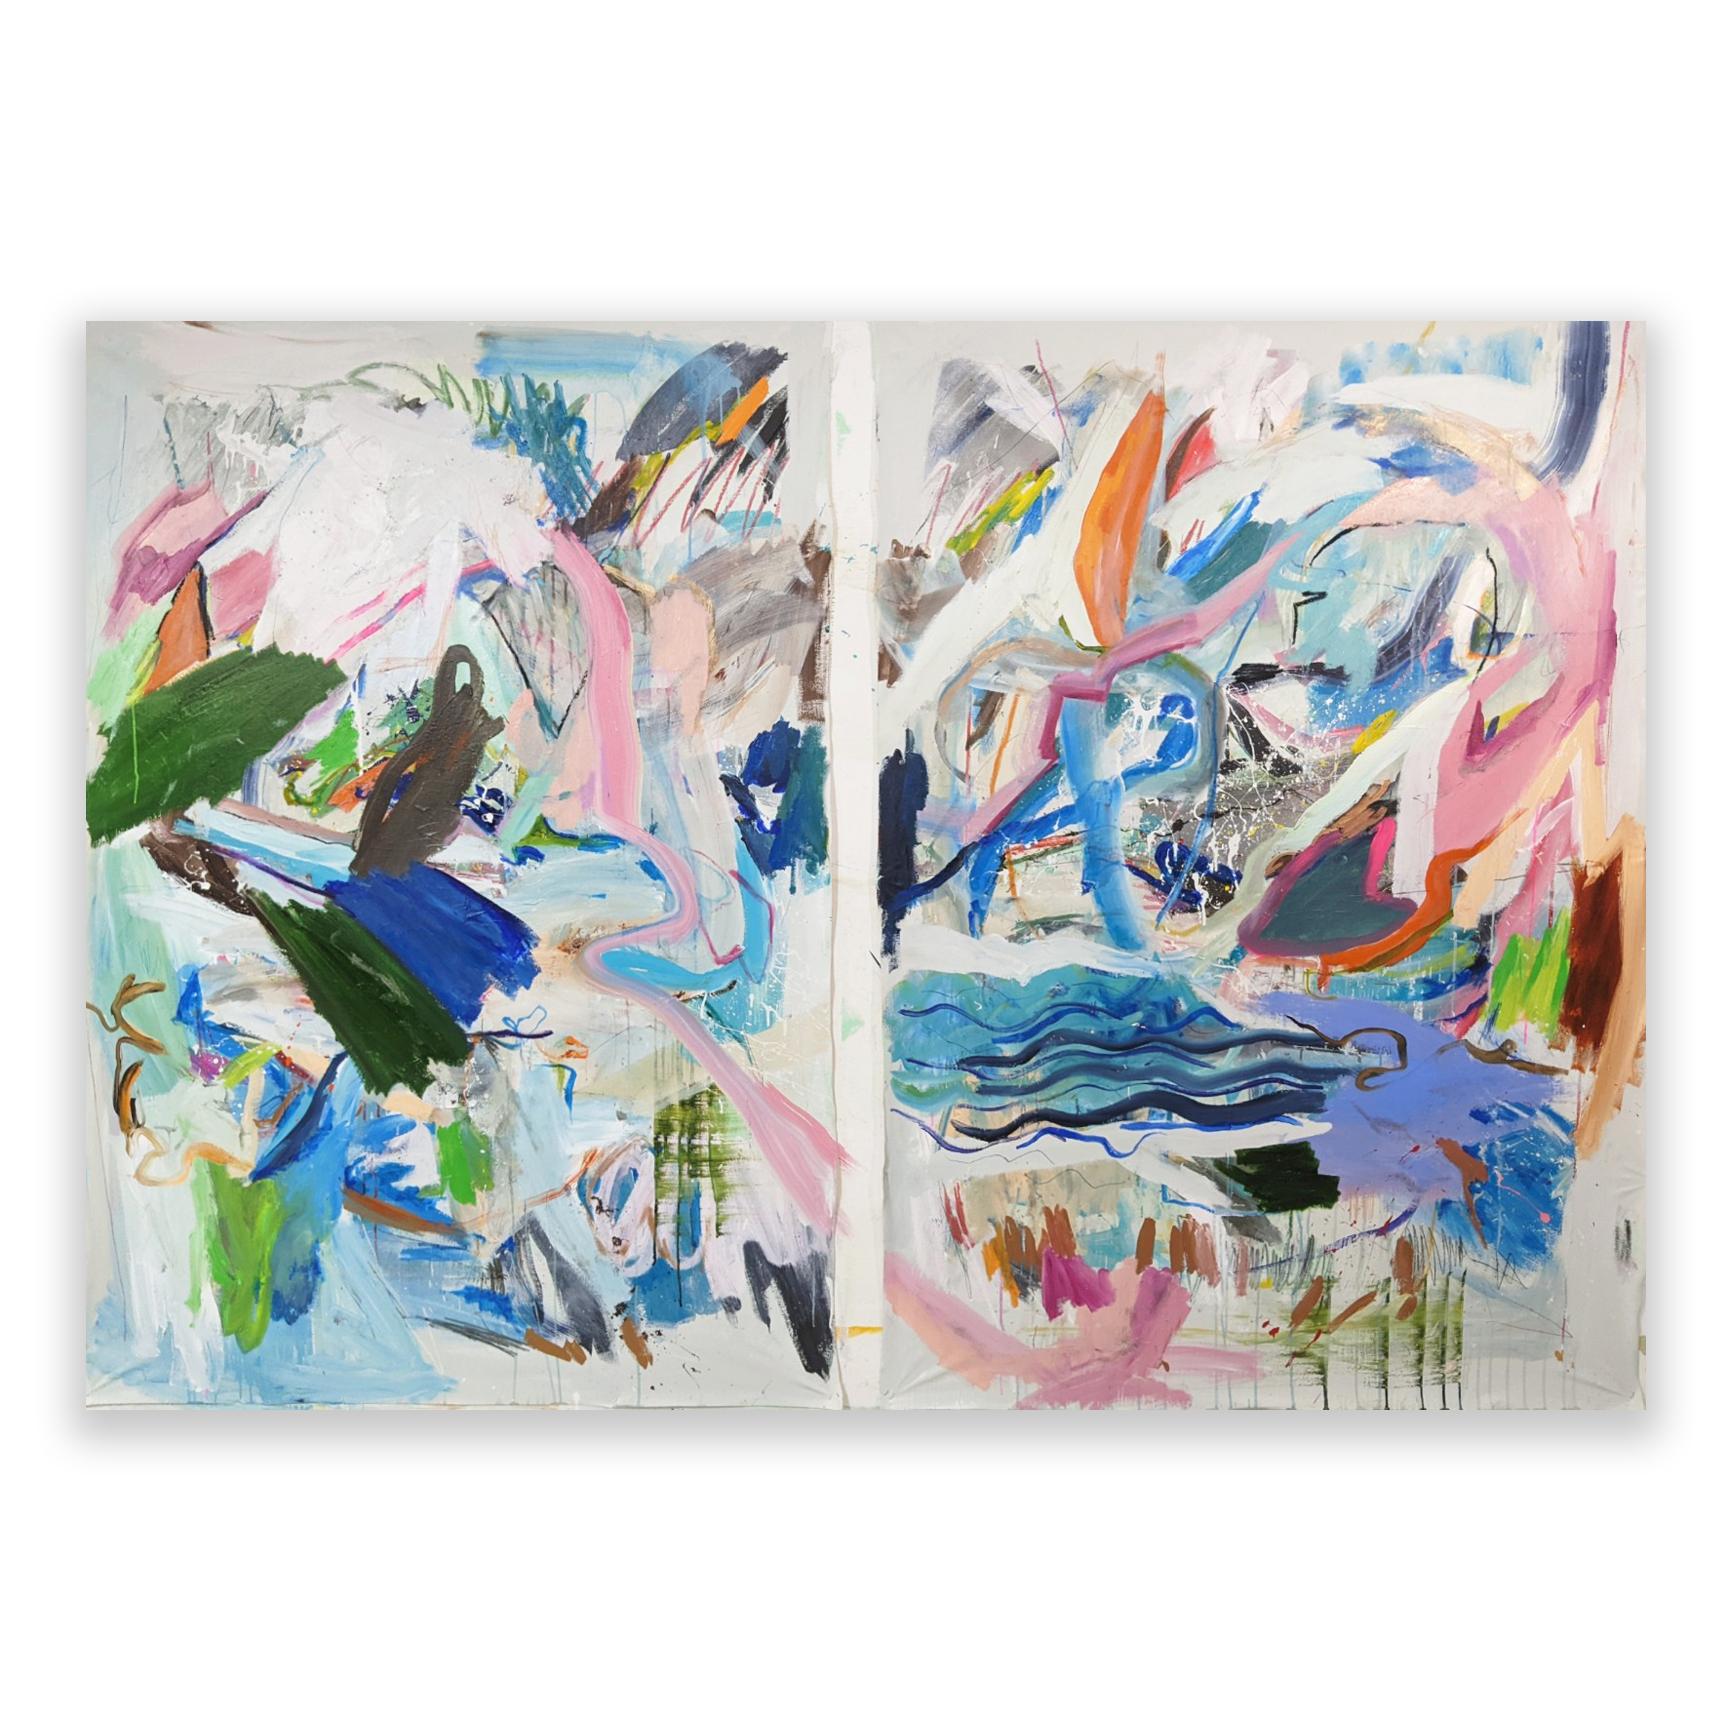 Mayflower Diptych by Joseph Conrad-Ferm, 2022
Mixed Media 
68 × 96 in 
172.7 × 243.8 cm

Mixed media abstract painting on canvas by NY-based artist Joseph Conrad-Ferm. 

Shipping is not included. See our shipping policies. Please contact us for